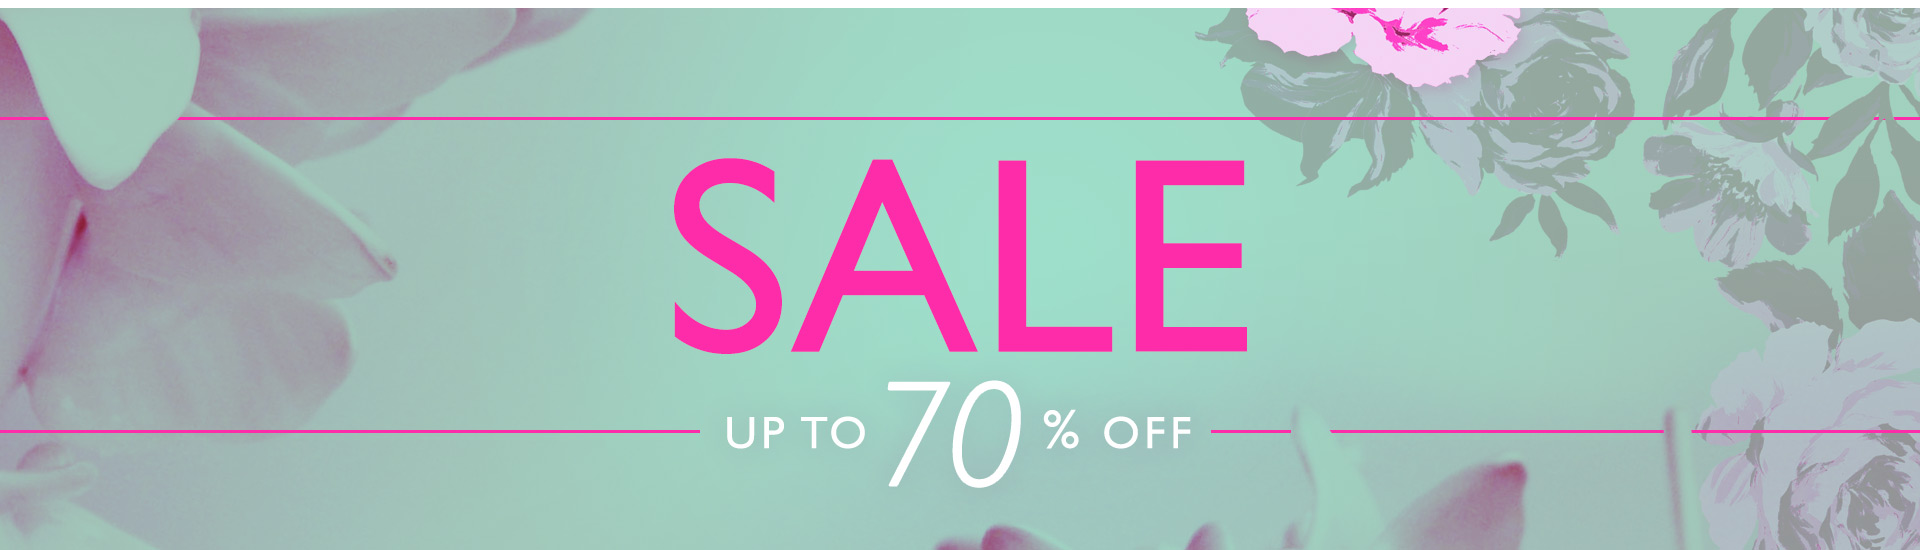 Apricot Apricot: Sale up to 70% off women's fashion clothes & accessories